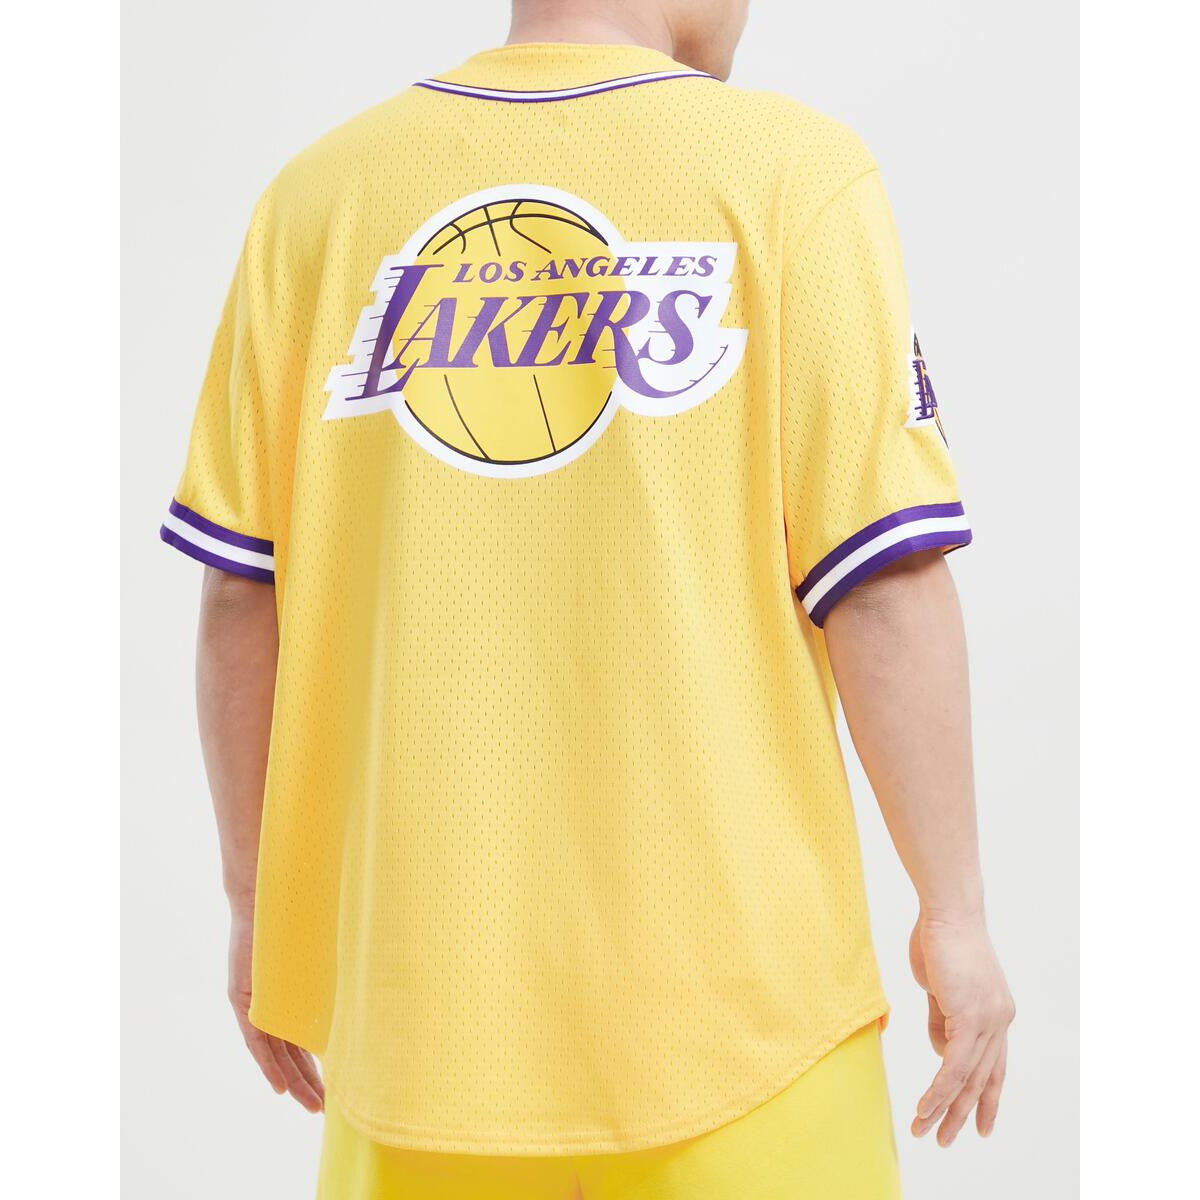 3T LA Lakers Shirt - New for Sale in Henderson, NV - OfferUp